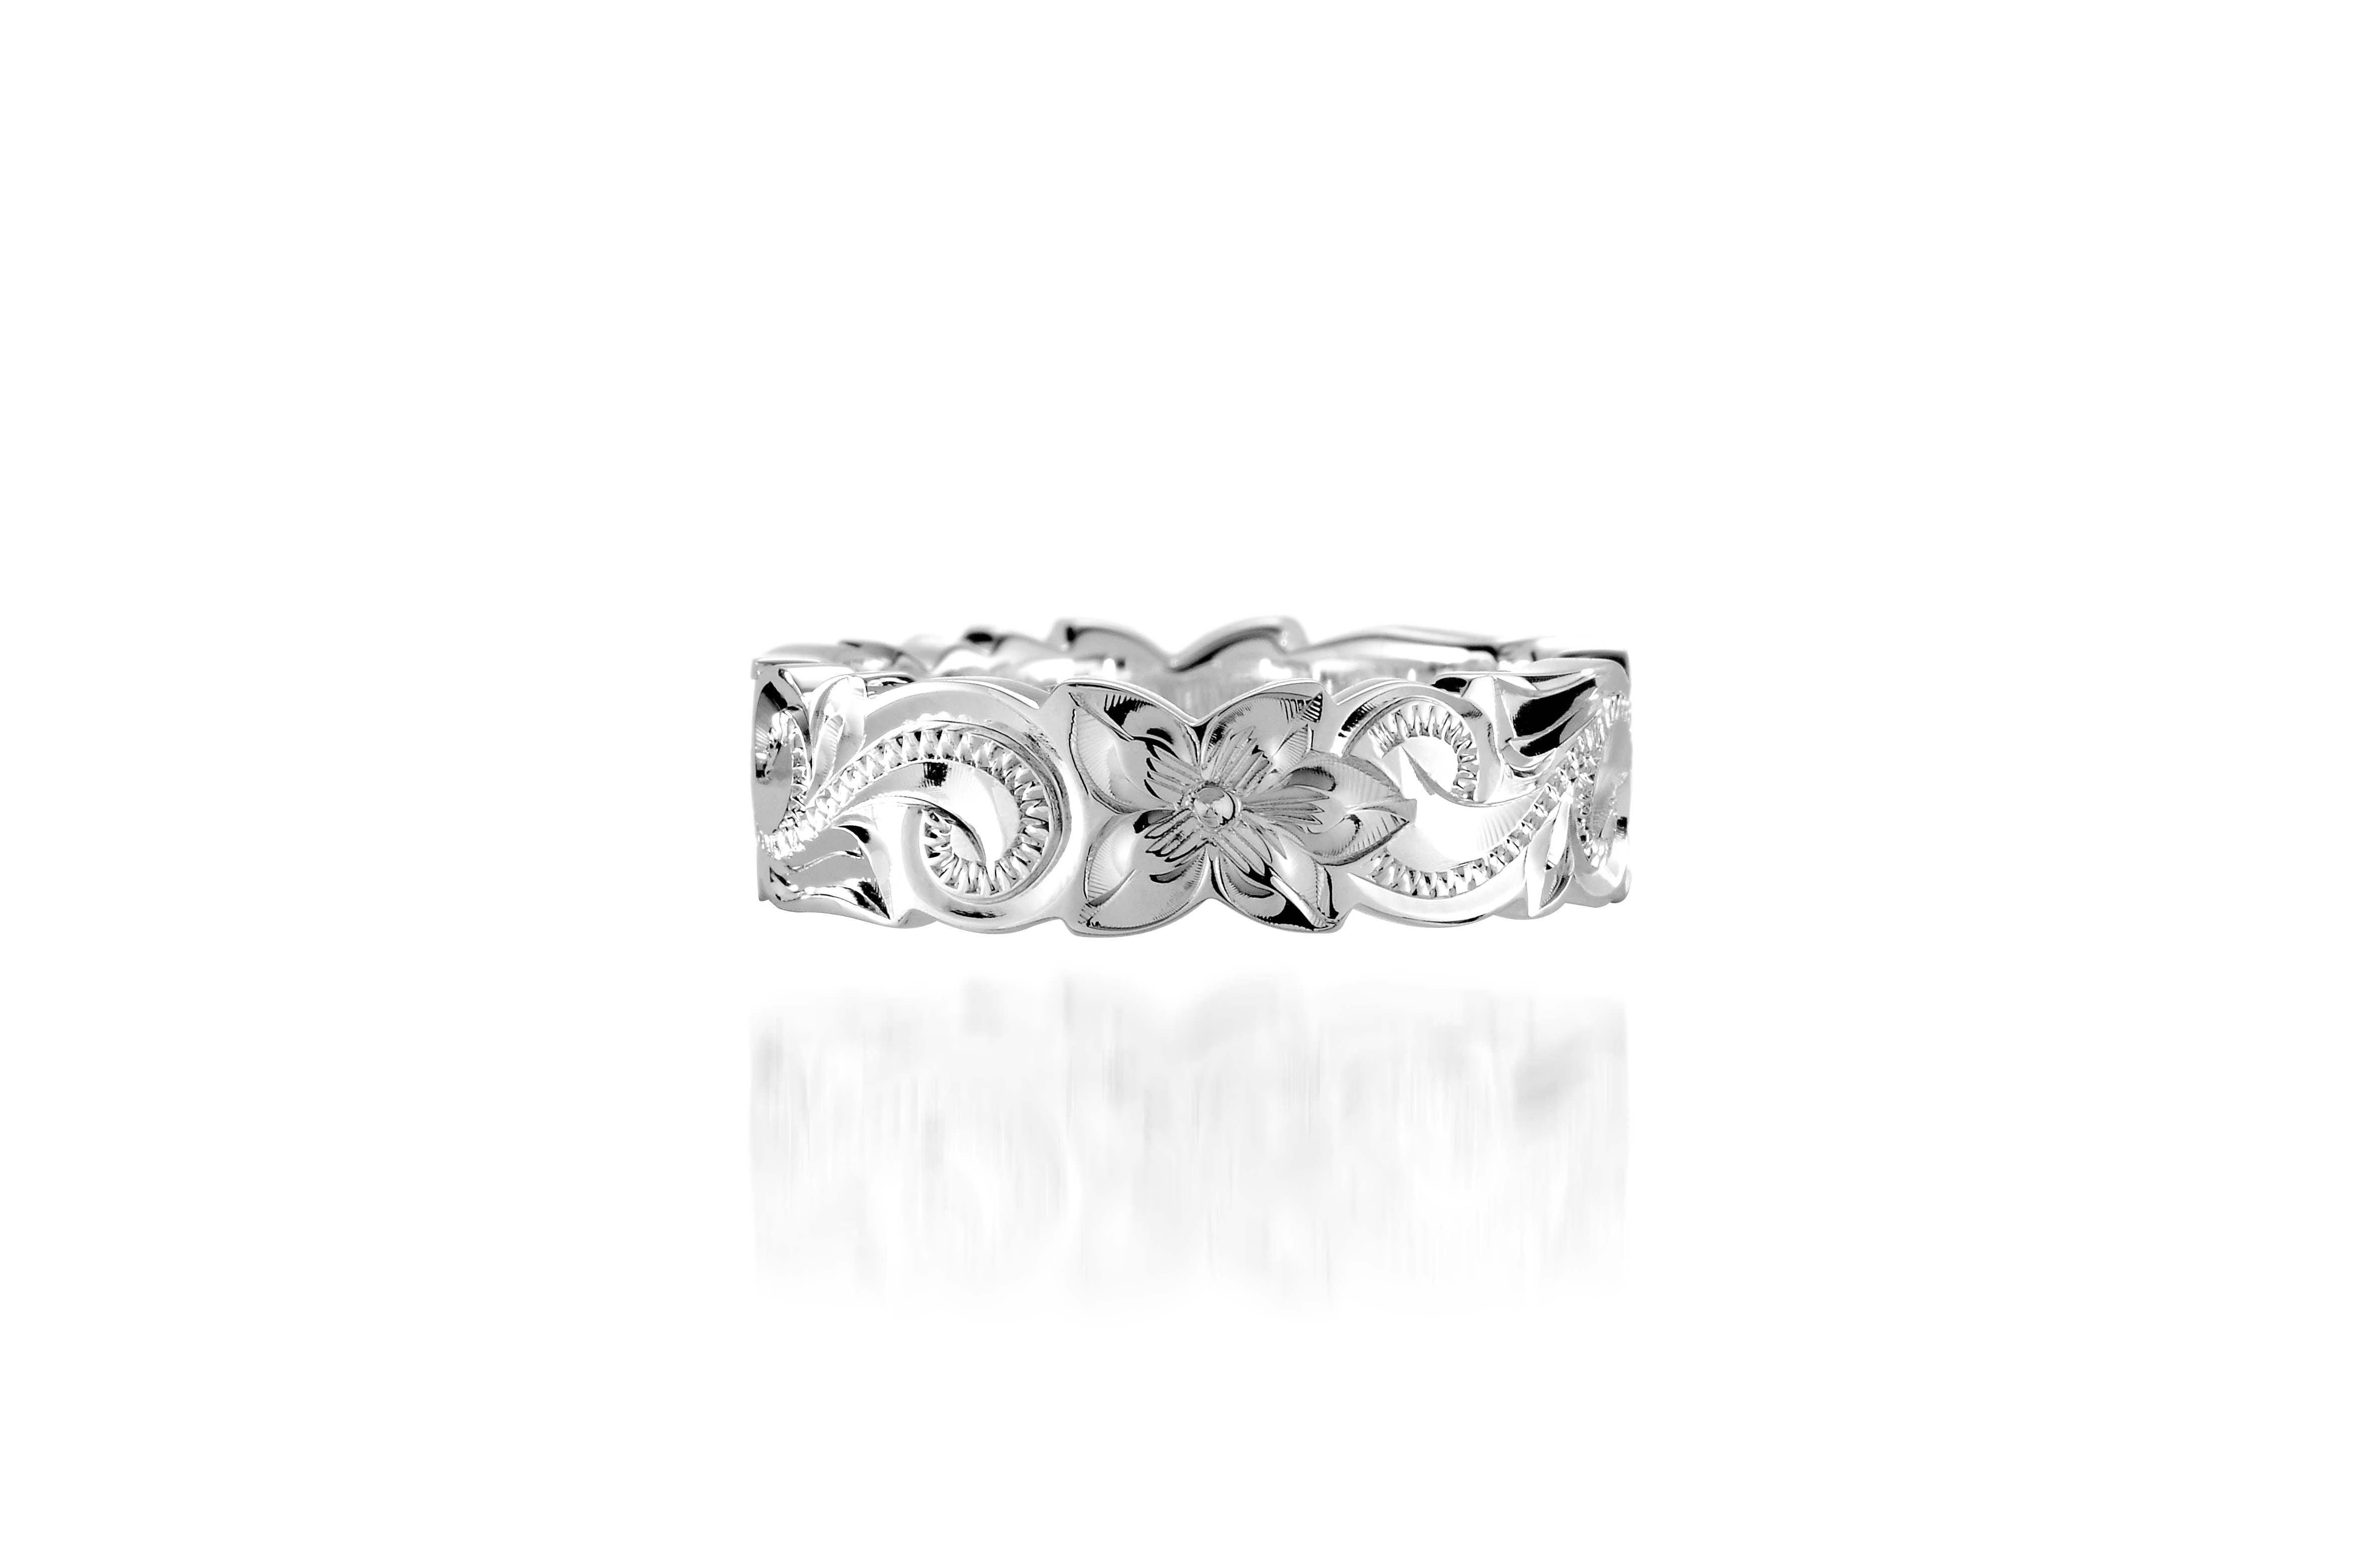 In this photo there is a sterling silver cut out ring with flower and scroll hand engravings.